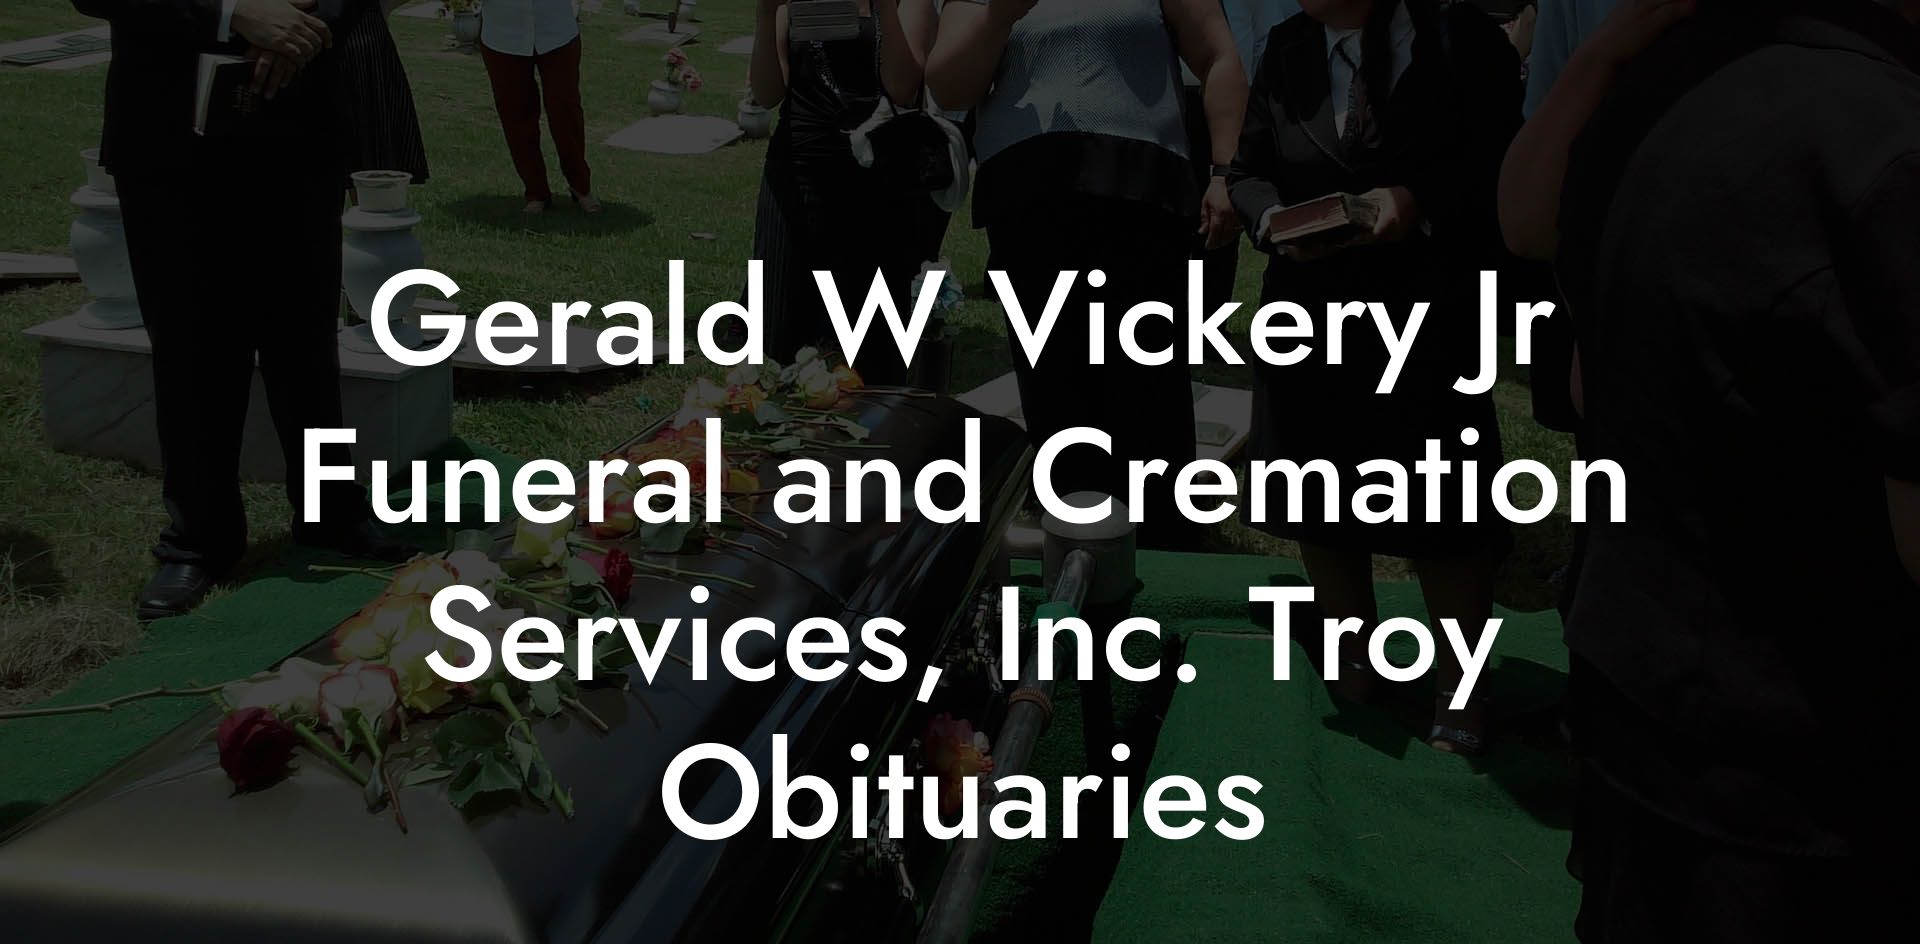 Gerald W Vickery Jr Funeral and Cremation Services, Inc. Troy Obituaries